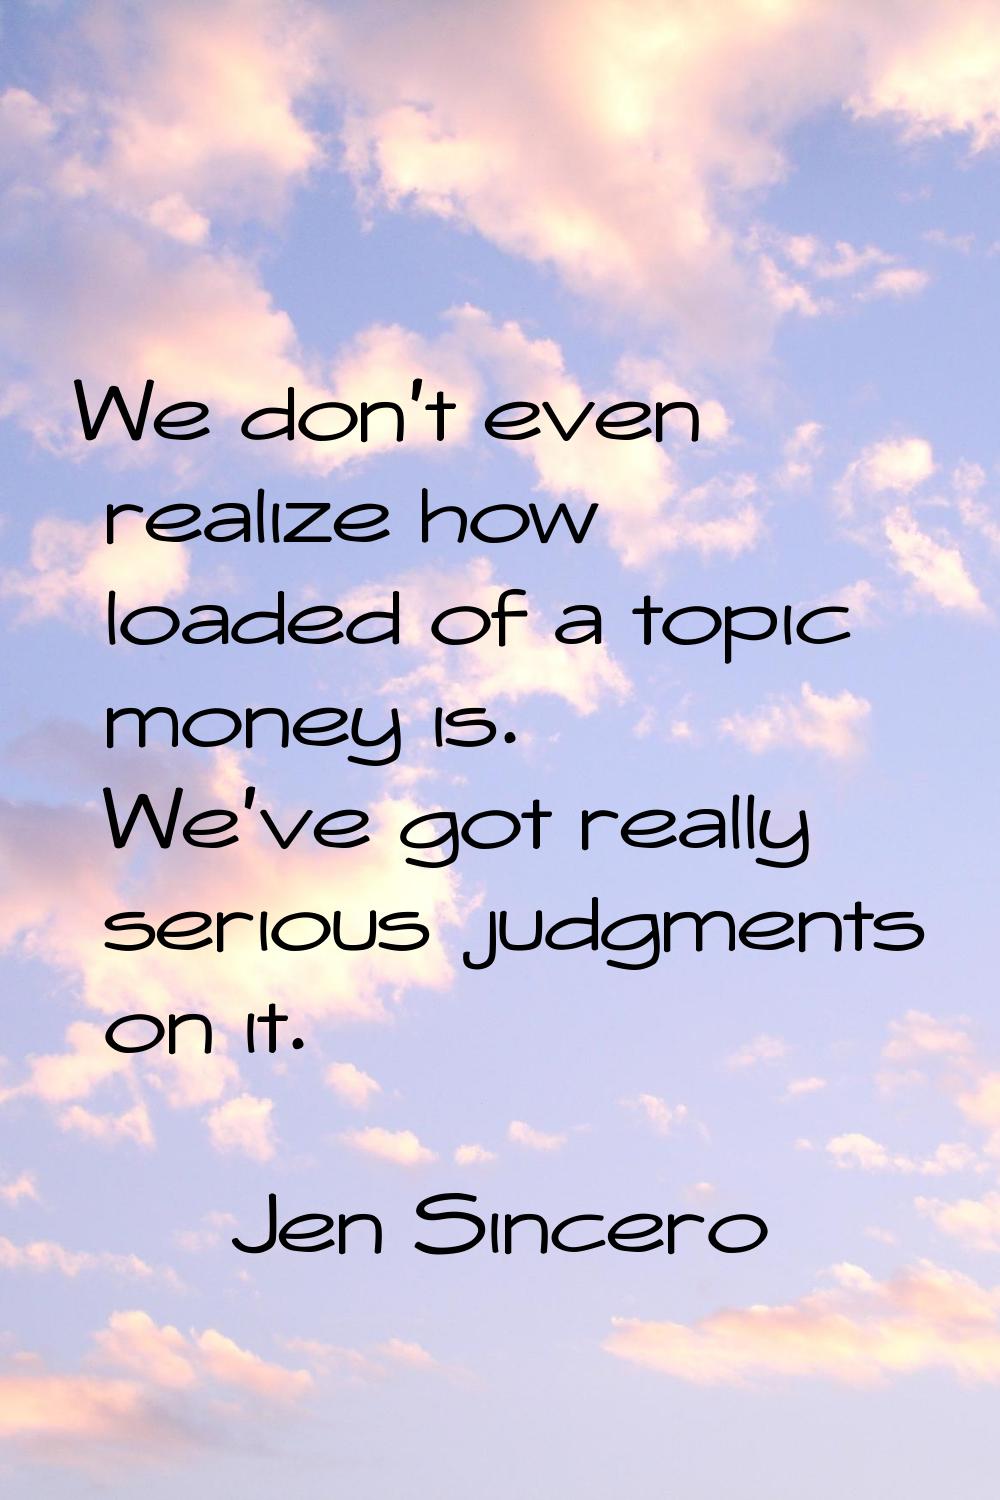 We don't even realize how loaded of a topic money is. We've got really serious judgments on it.